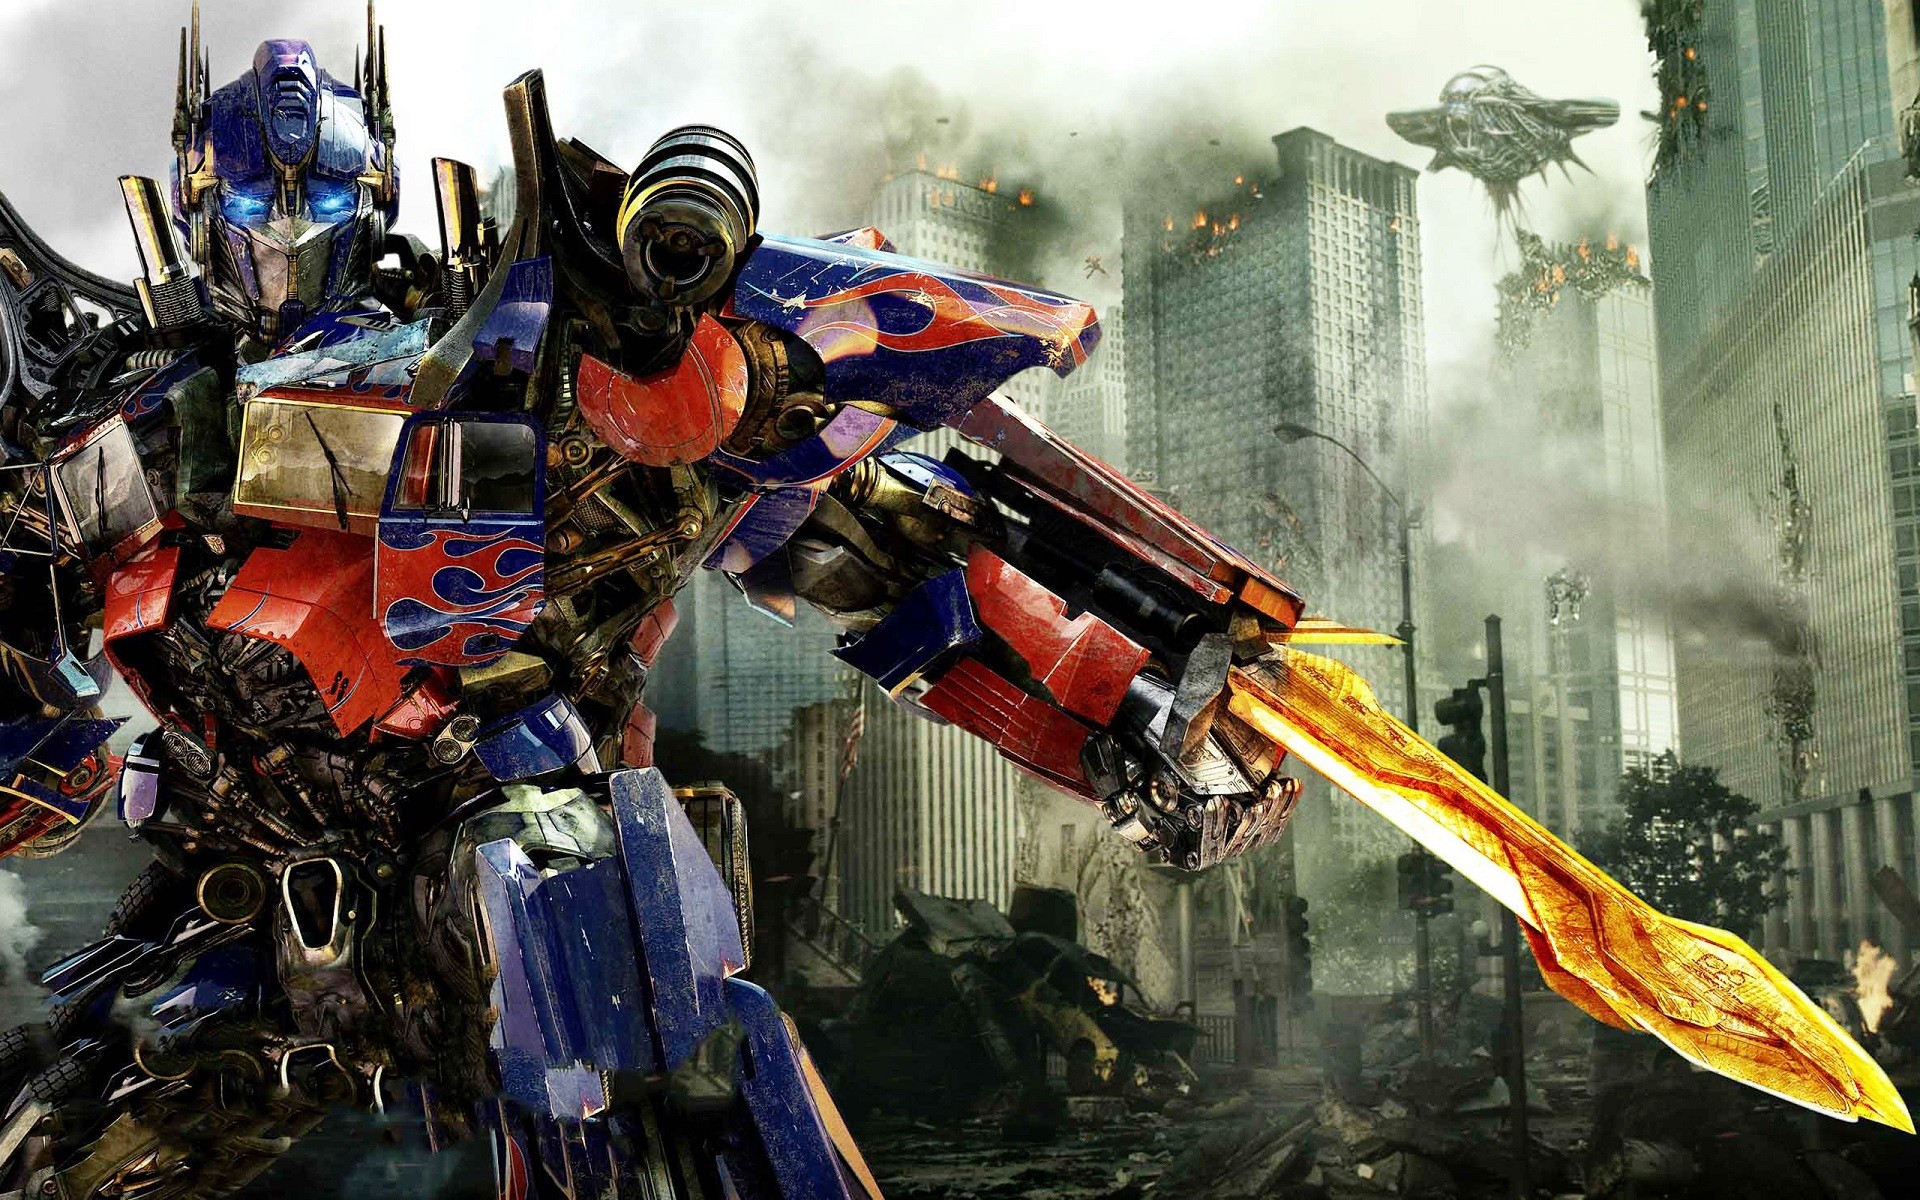 1920x1200 Transformers-wallpaper -15-HD-Collections-optimus_prime_in_transformers_3-wide-1024x640